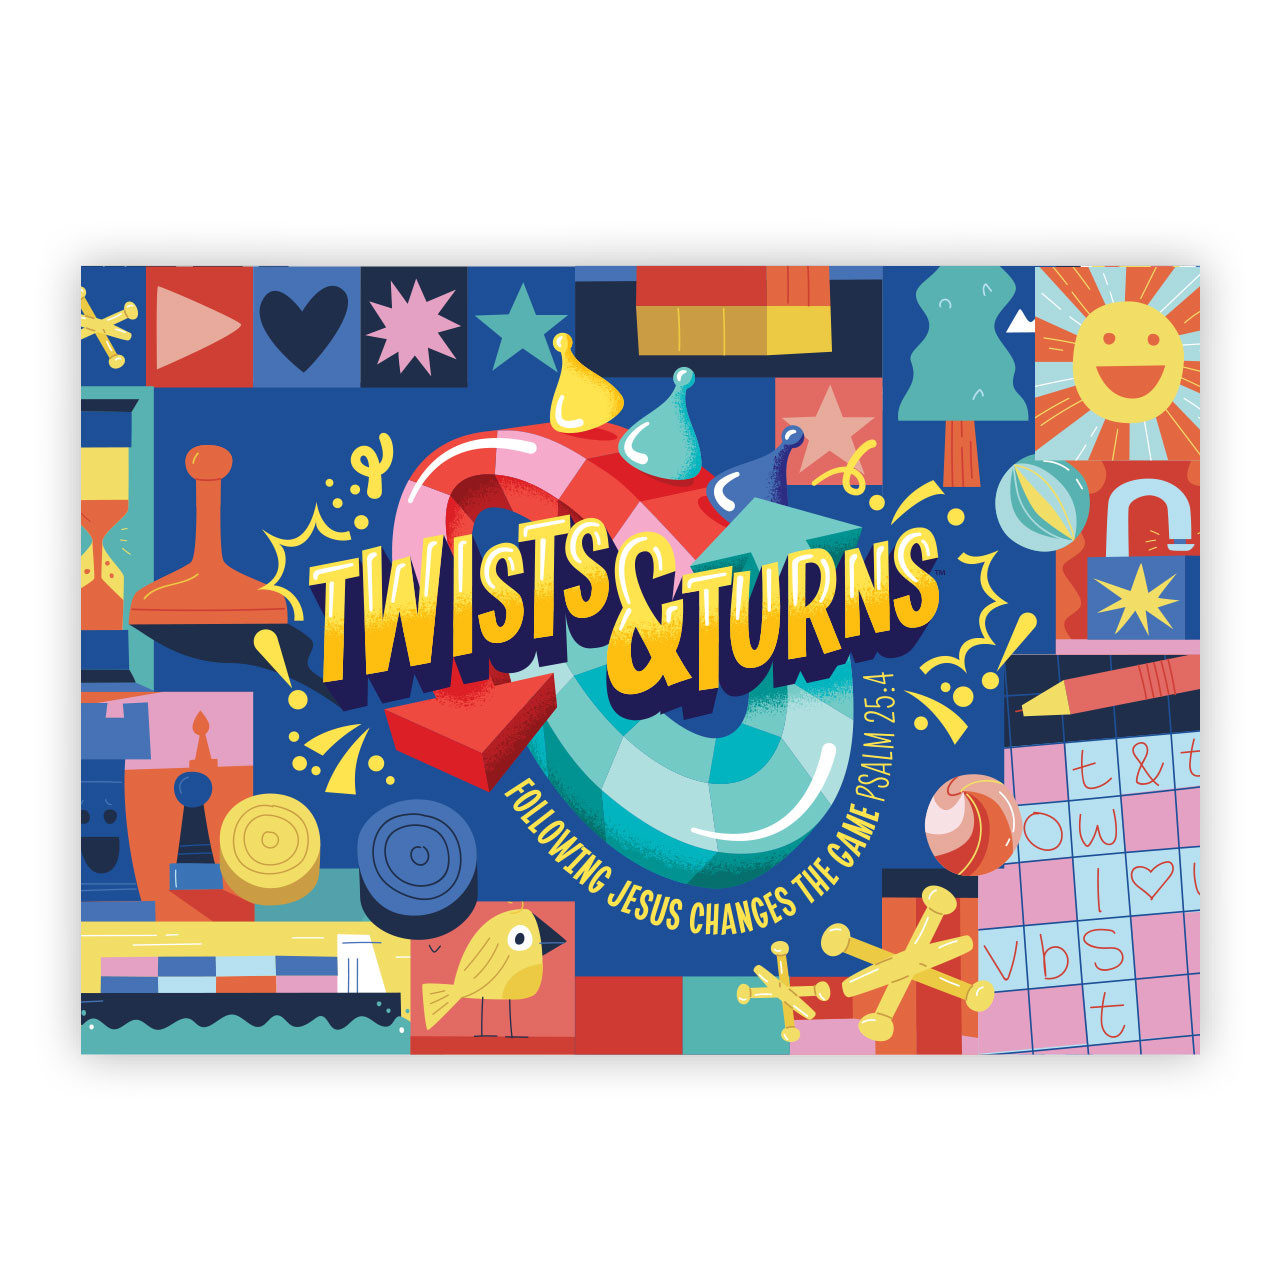 Supersized Backdrop - Twists & Turns VBS 2023 by Lifeway